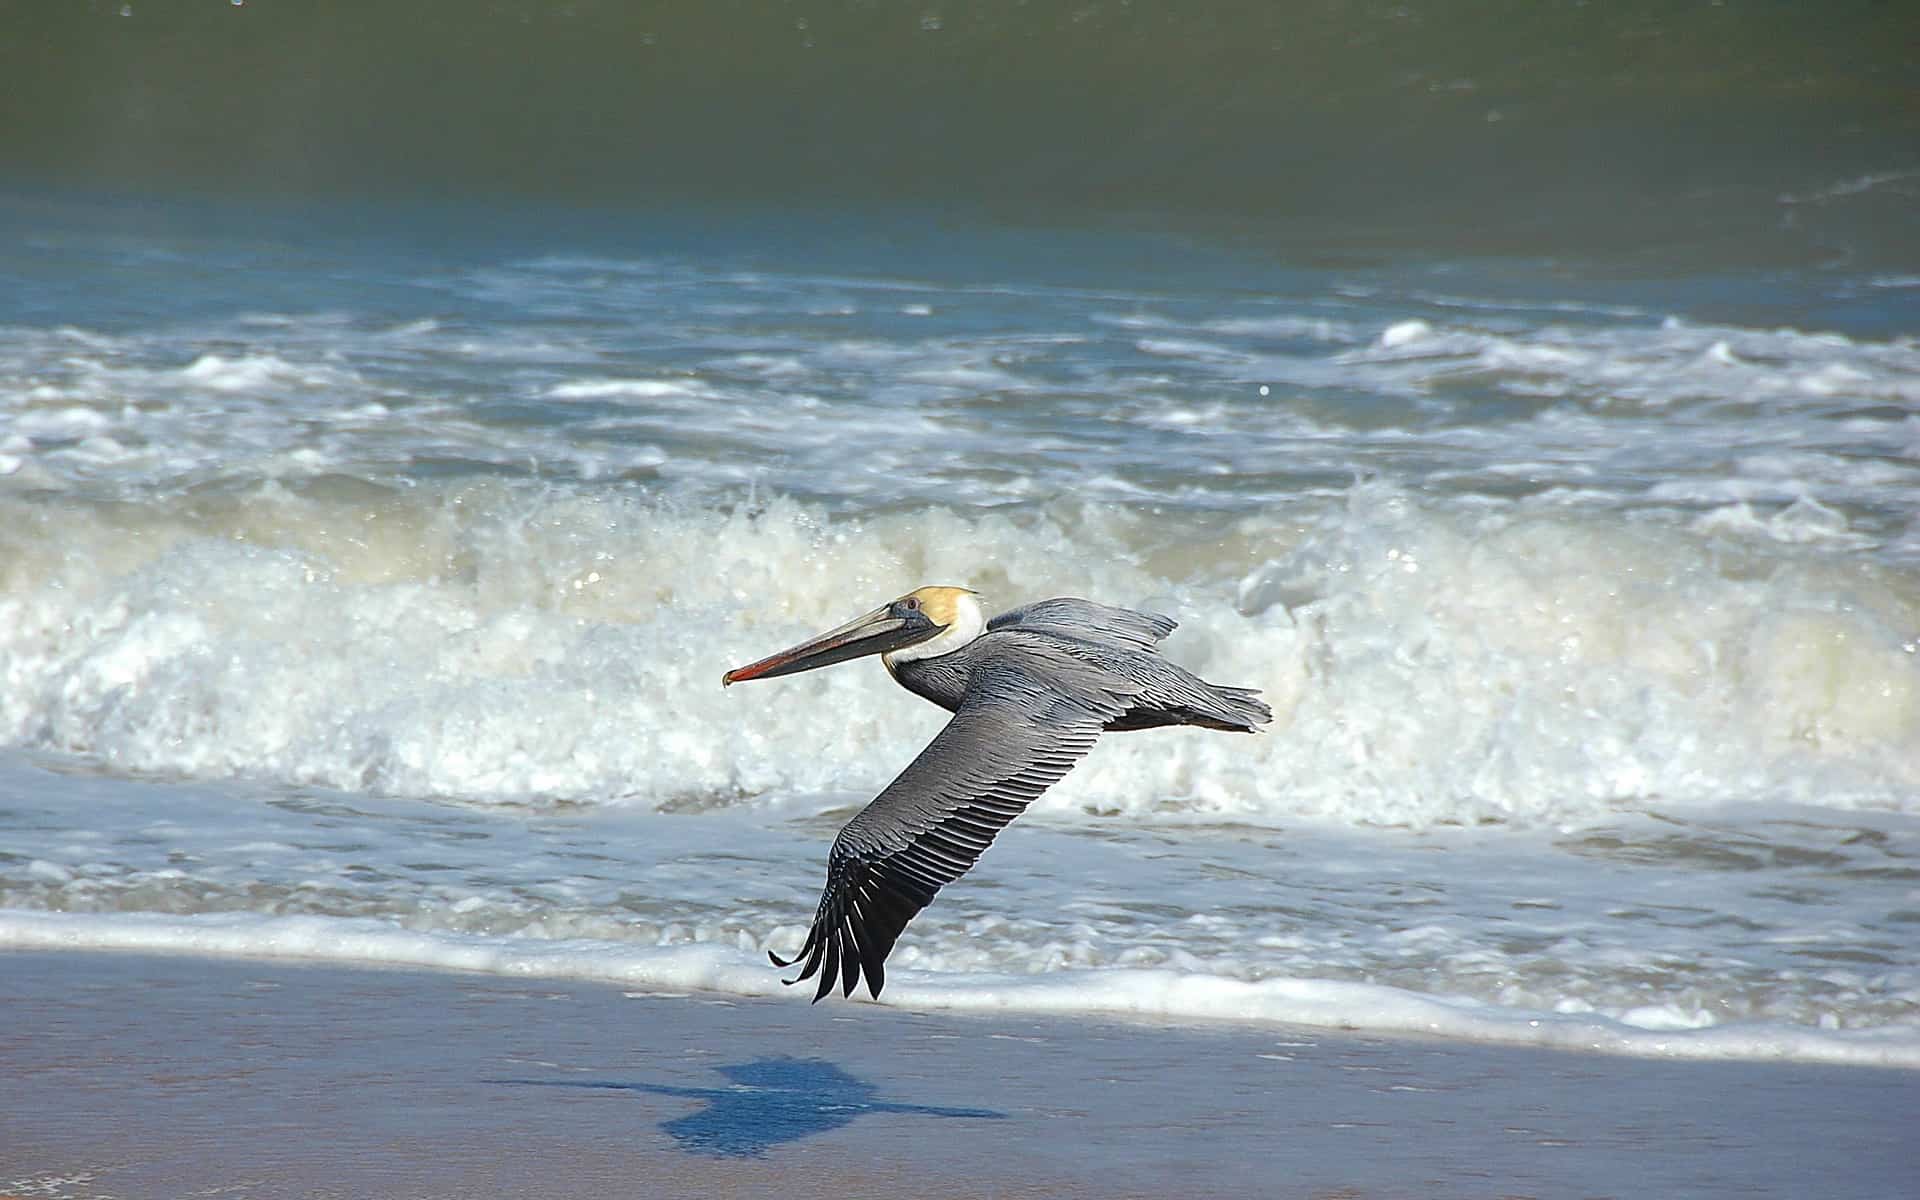 How fast does a pelican fly